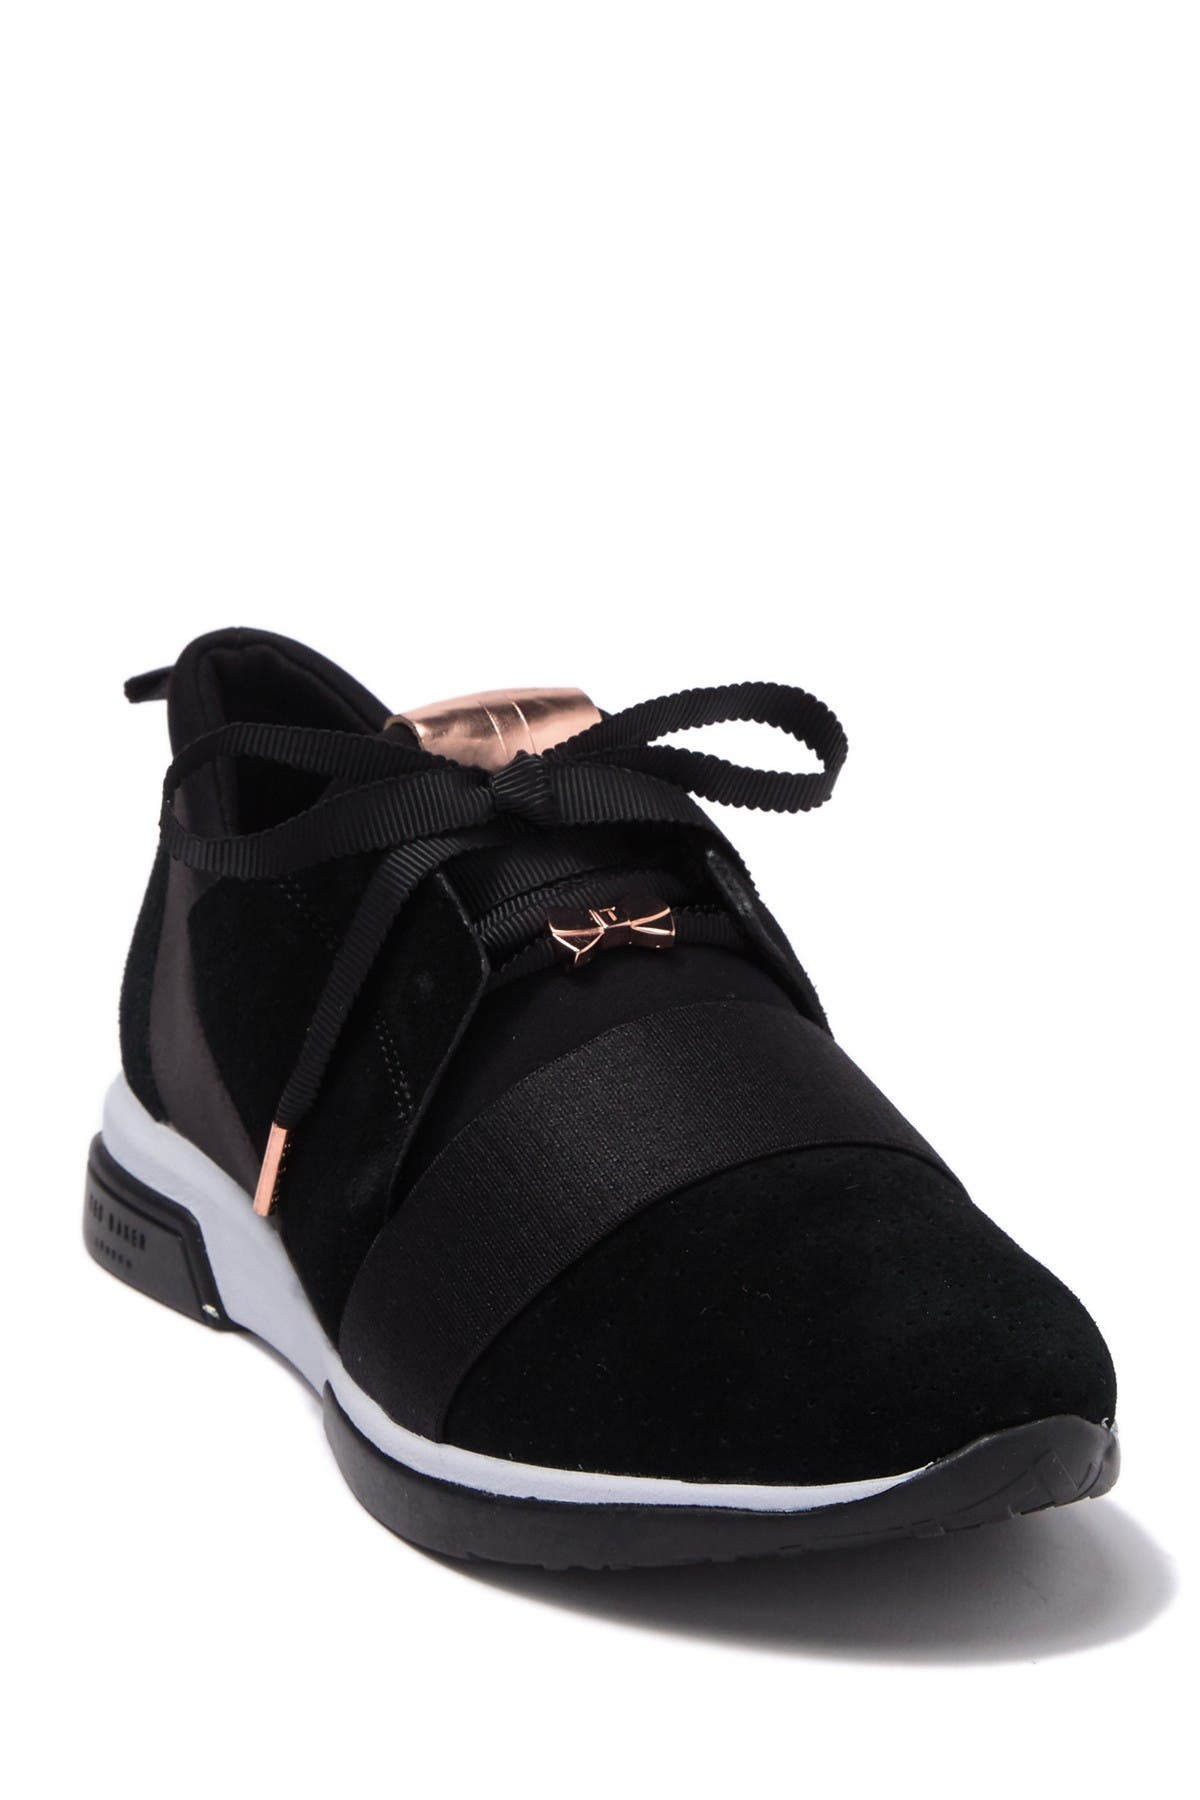 ted baker cepap trainers